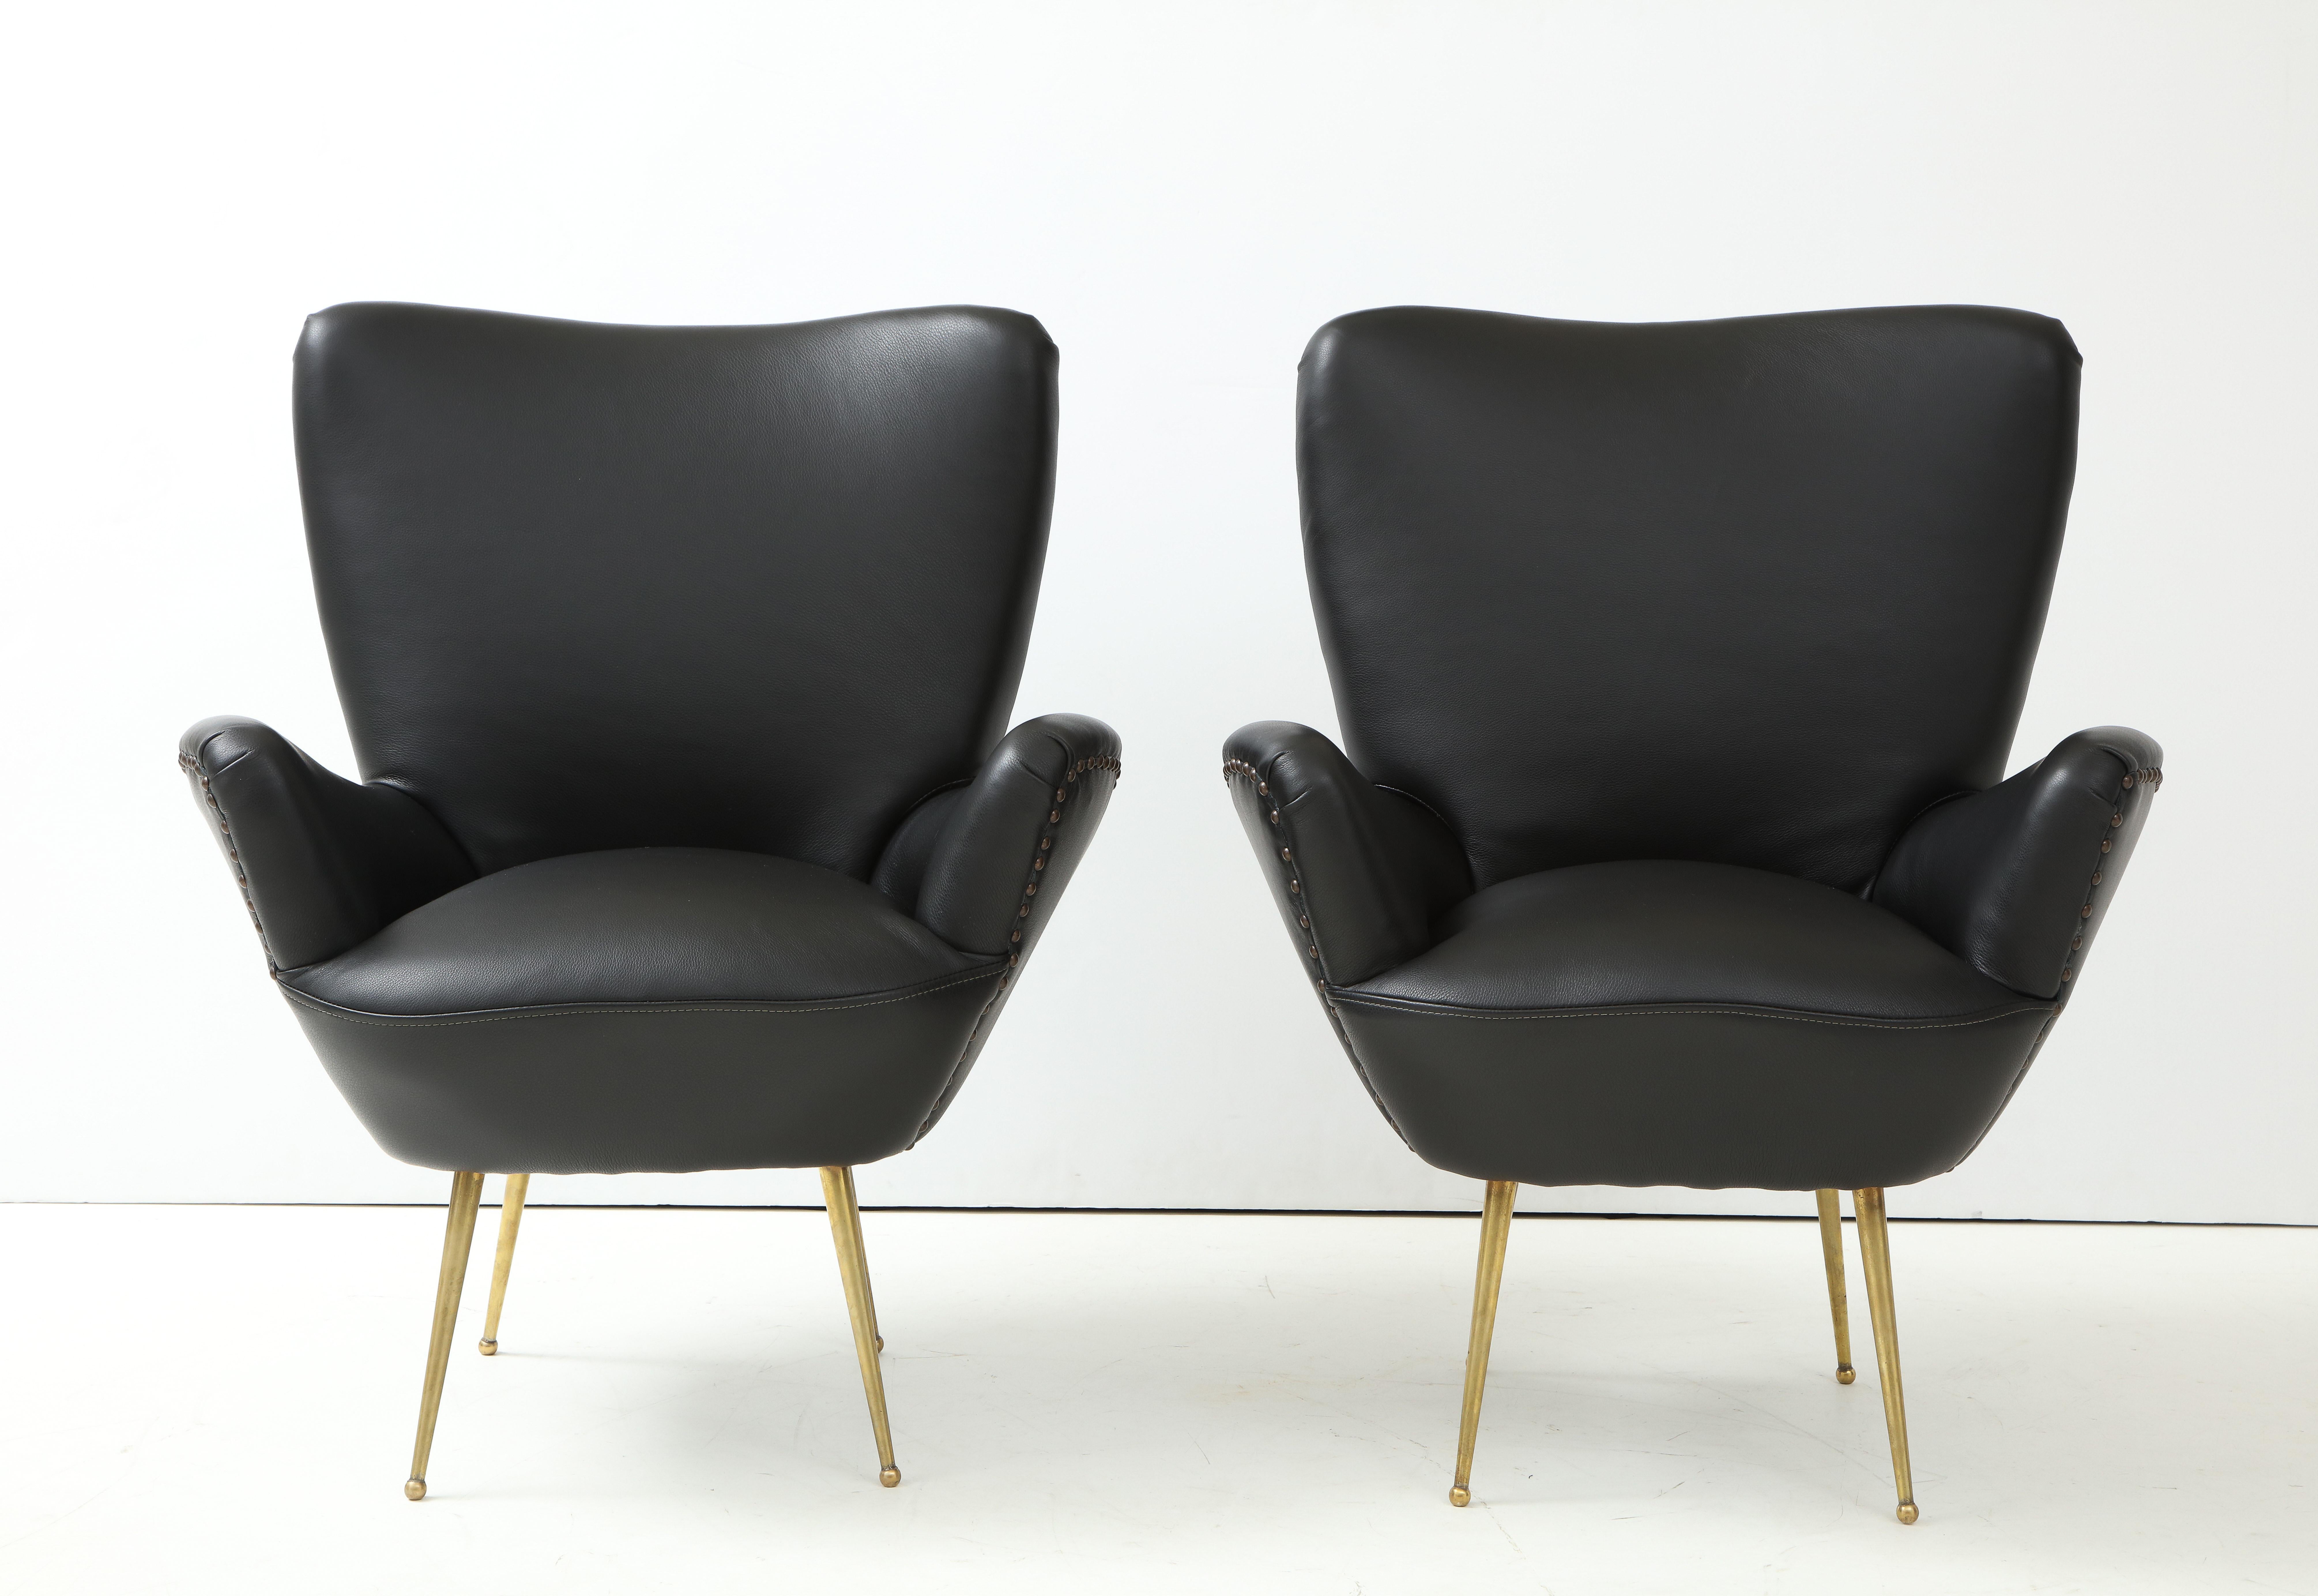 Stunning pair of 1960's modernist sculptural lounge chairs designed by Antonino Gorgone, with solid brass legs fully restored and reupholstered in leather with bronze nails detail.